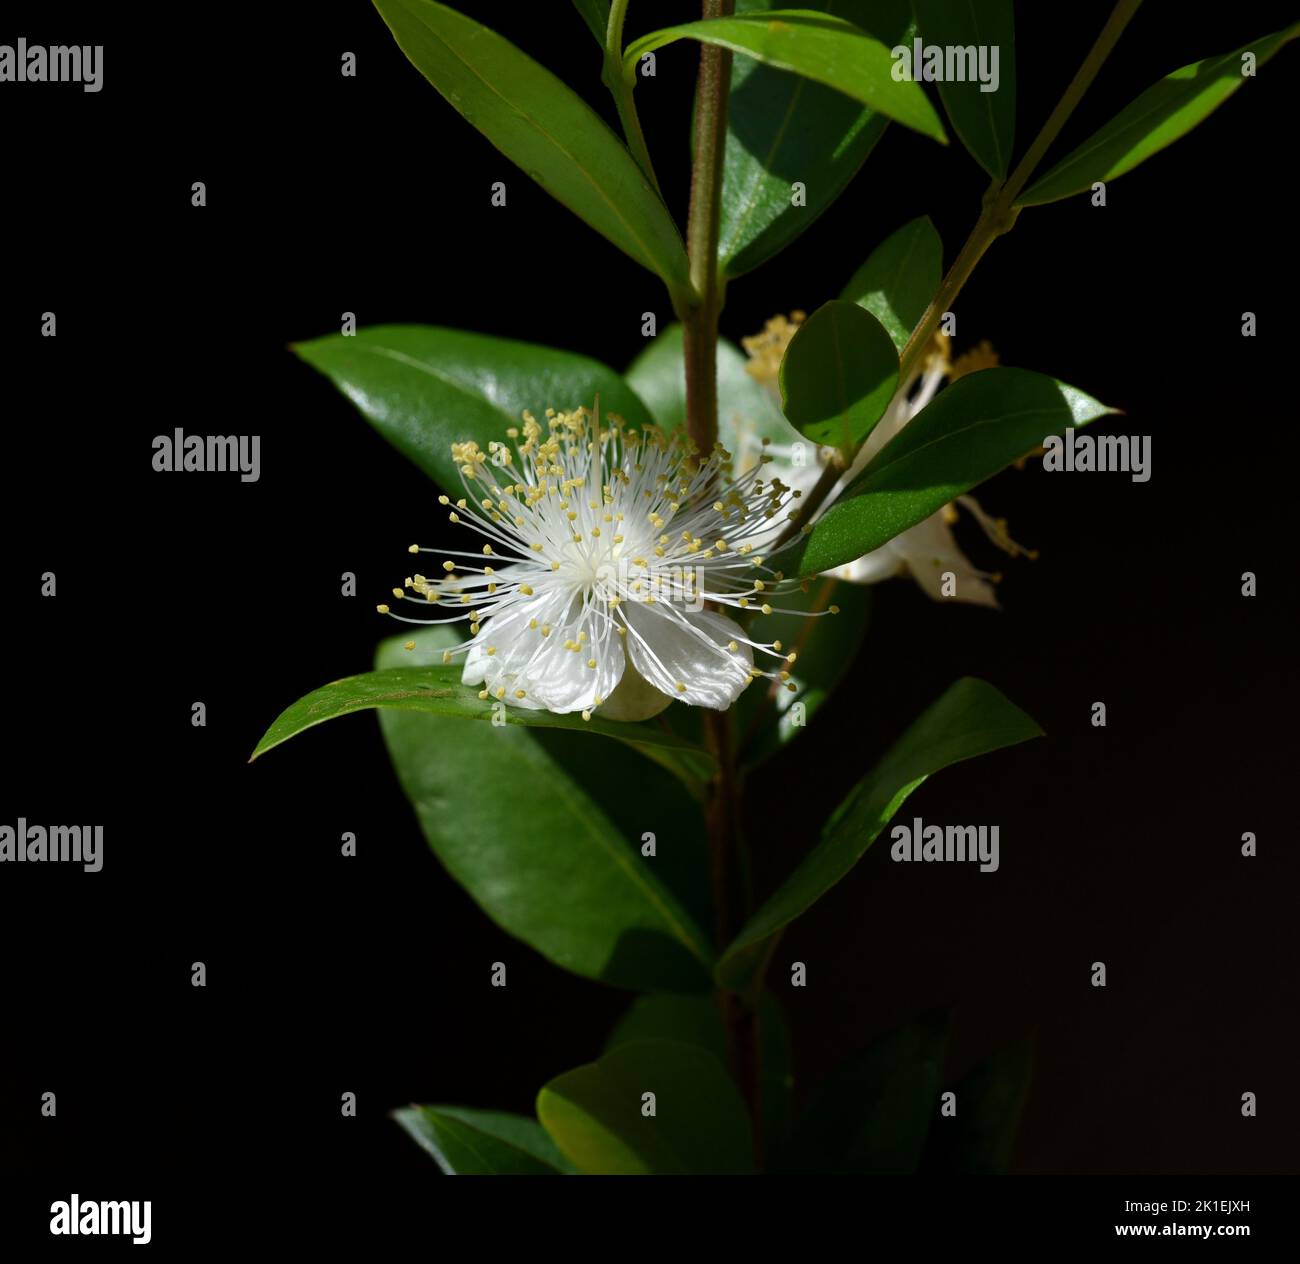 Myrtle, Myrtus communis, also called balm is a shrub with beautiful white flowers. It is an important medicinal plant and an attractive garden plant. Stock Photo